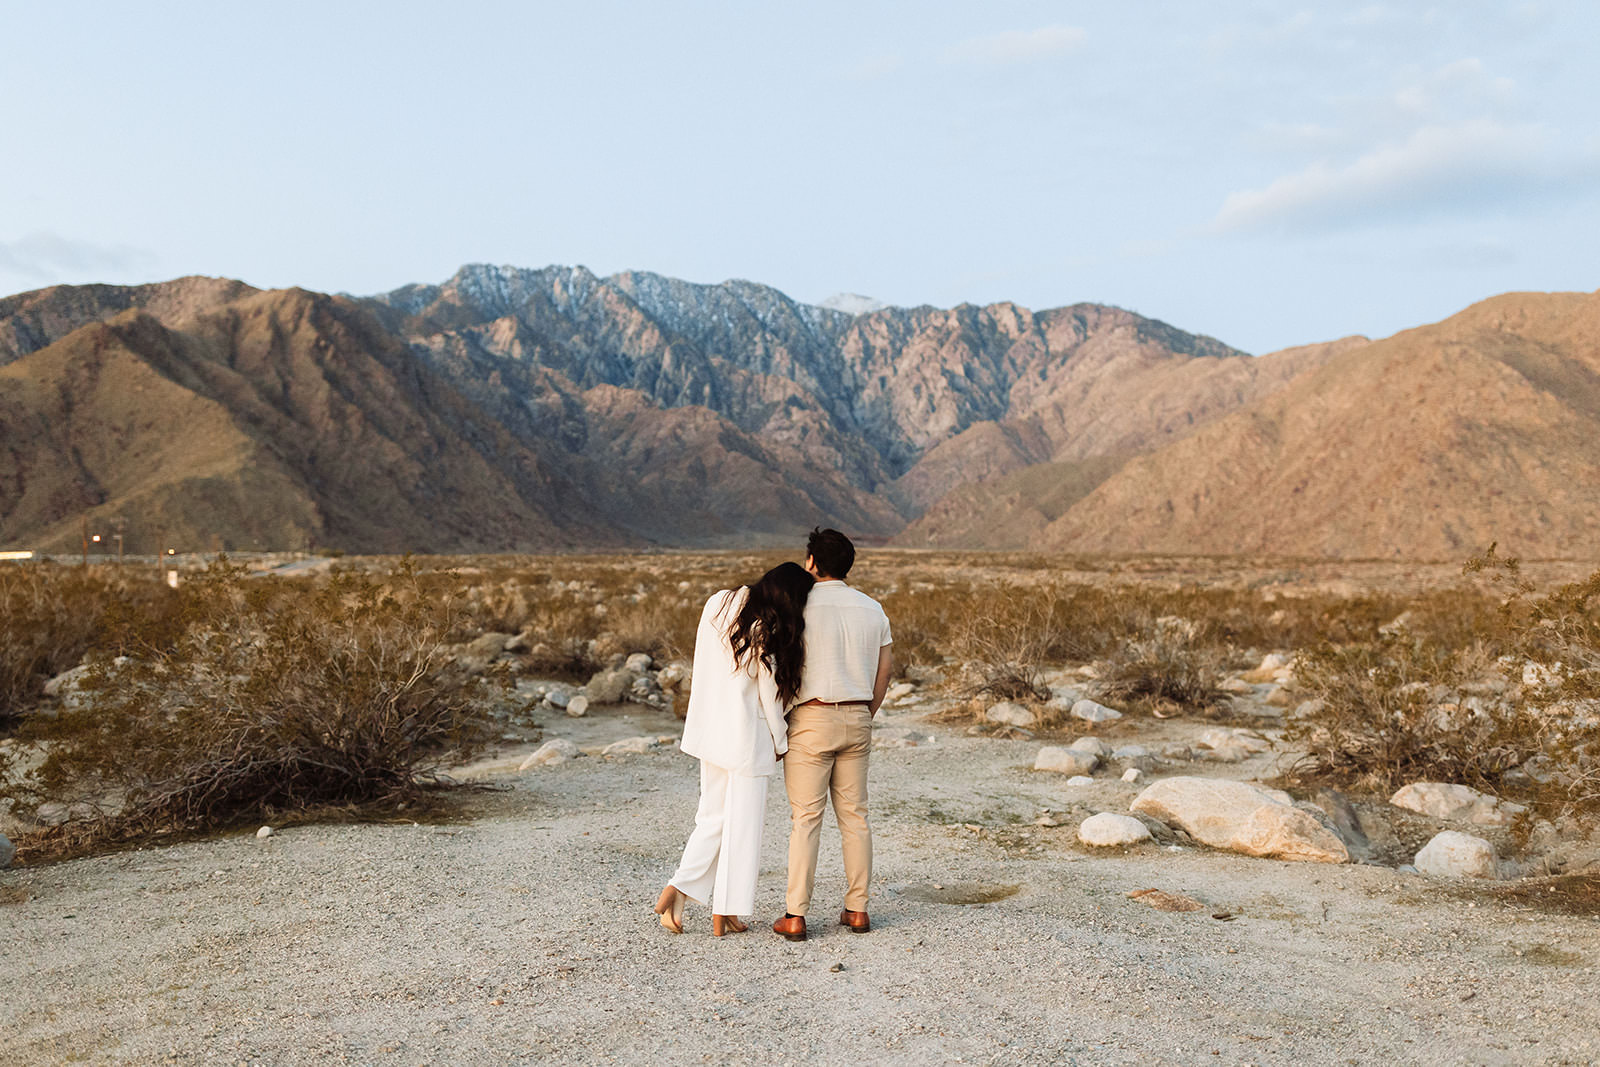 5 Locations For Your Desert Engagement Photos